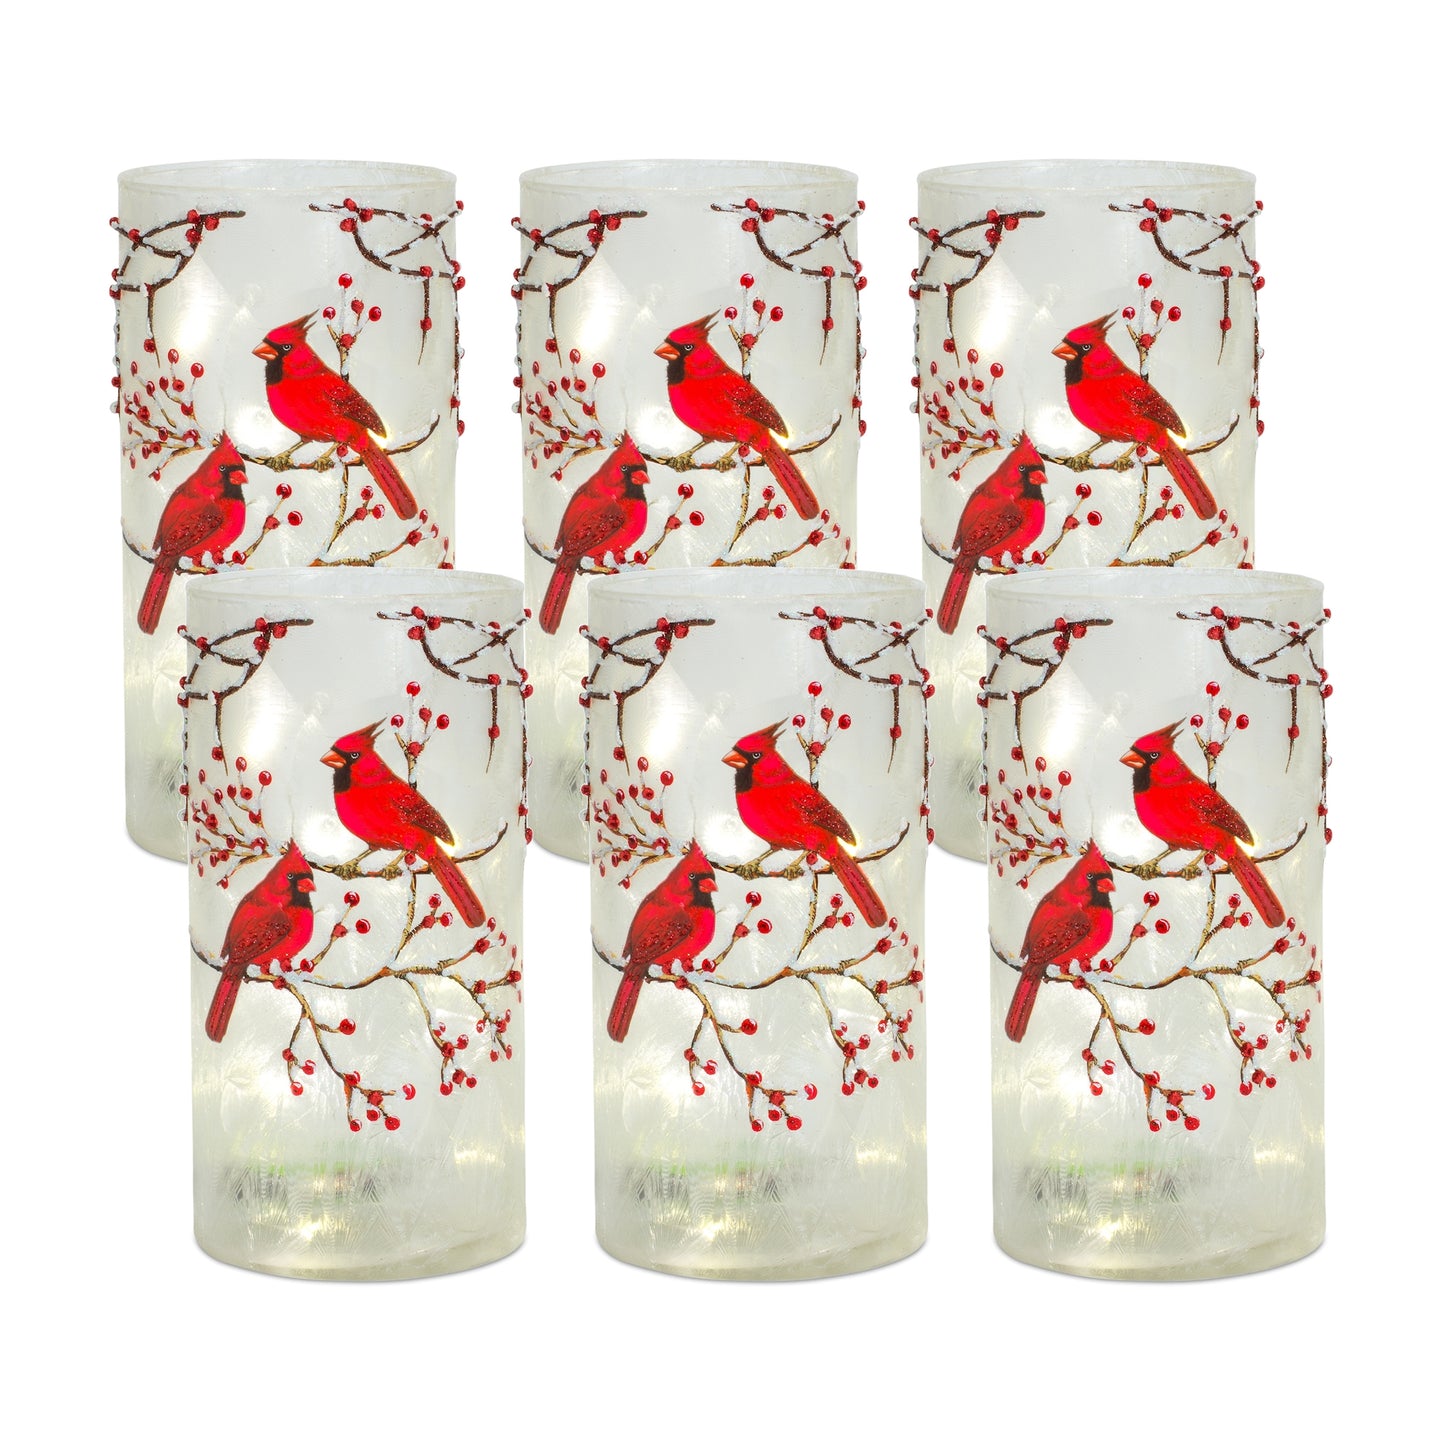 Frosted Glass Votive Holder with Beaded Cardinal Bird Design (Set of 6)